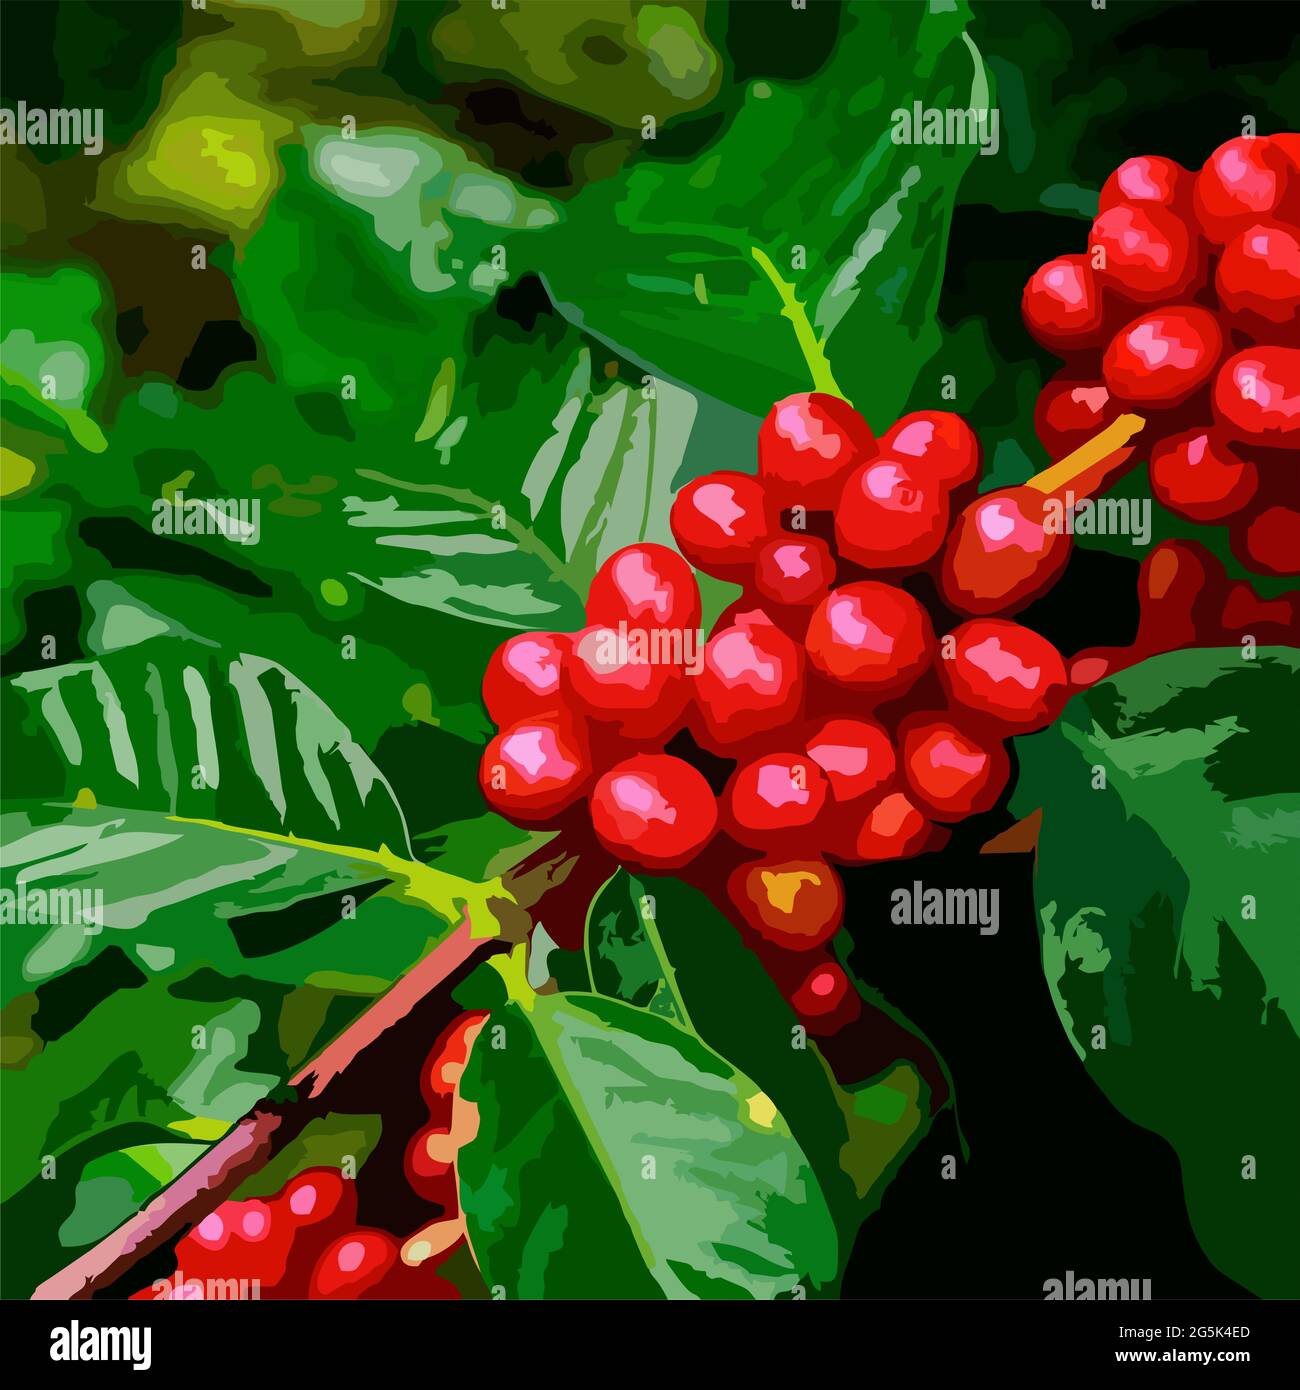 CAFE, IMAGE OF CAFFETO, COFFEE CHERRY Stock Vector